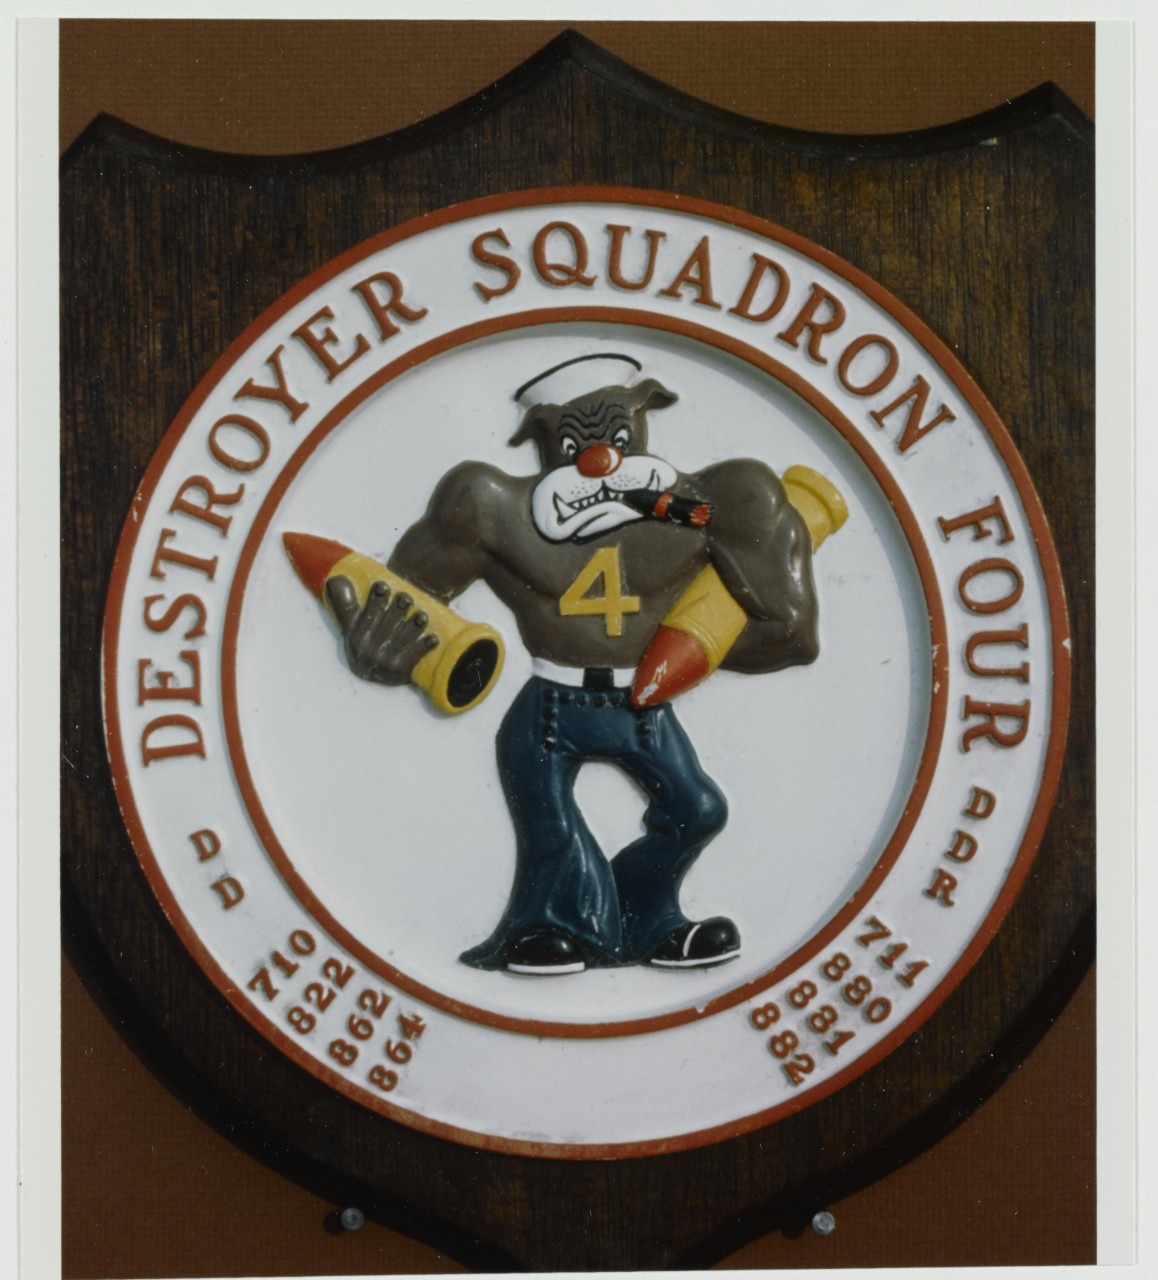 Photo #: NH 101843-KN Insignia of Destroyer Squadron FOUR